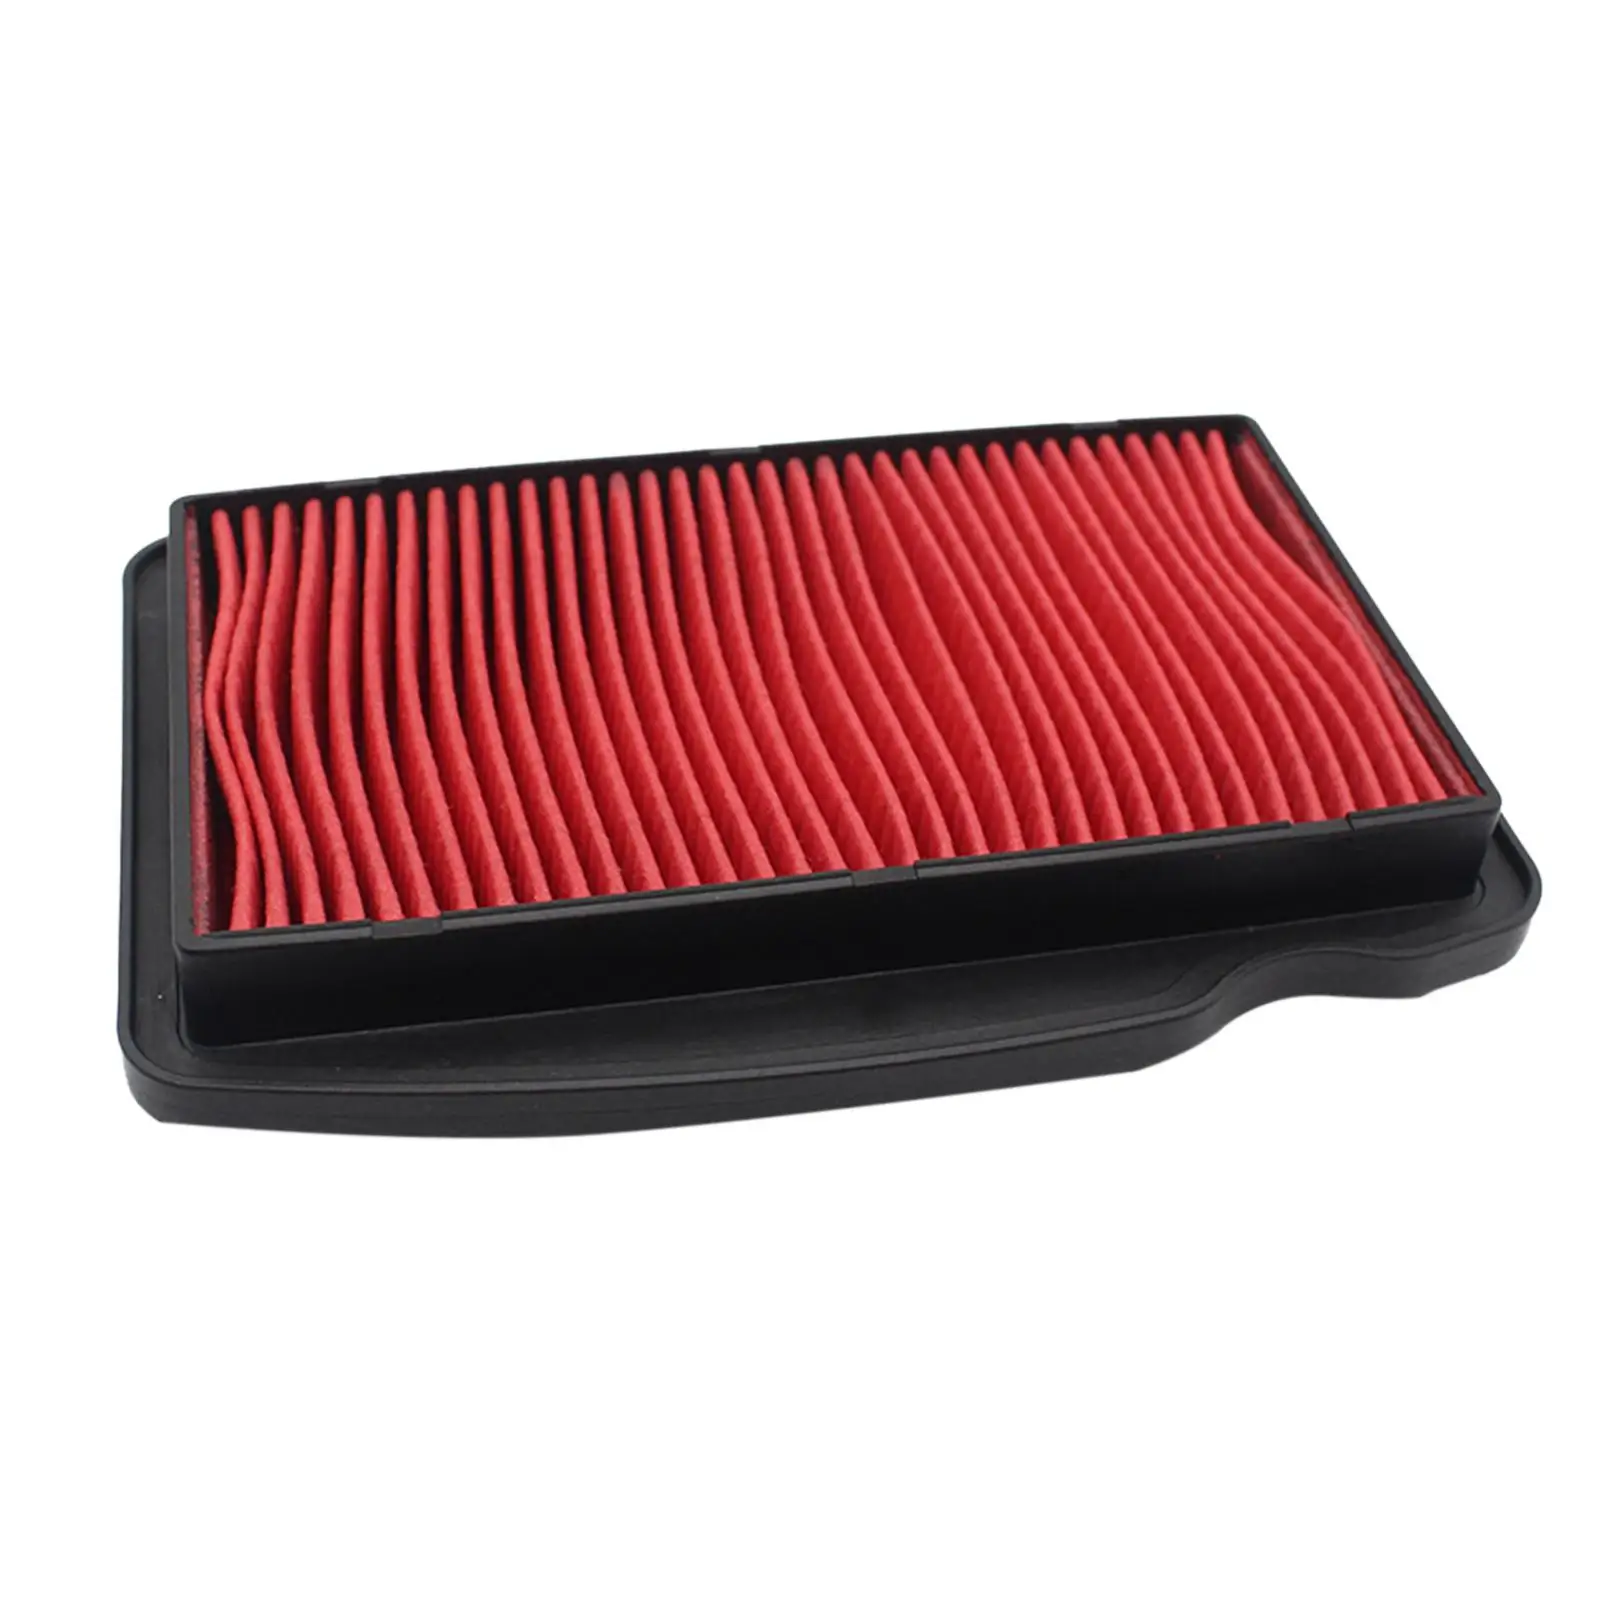 Air Intake Filter Fit for x , Motorbike Parts,